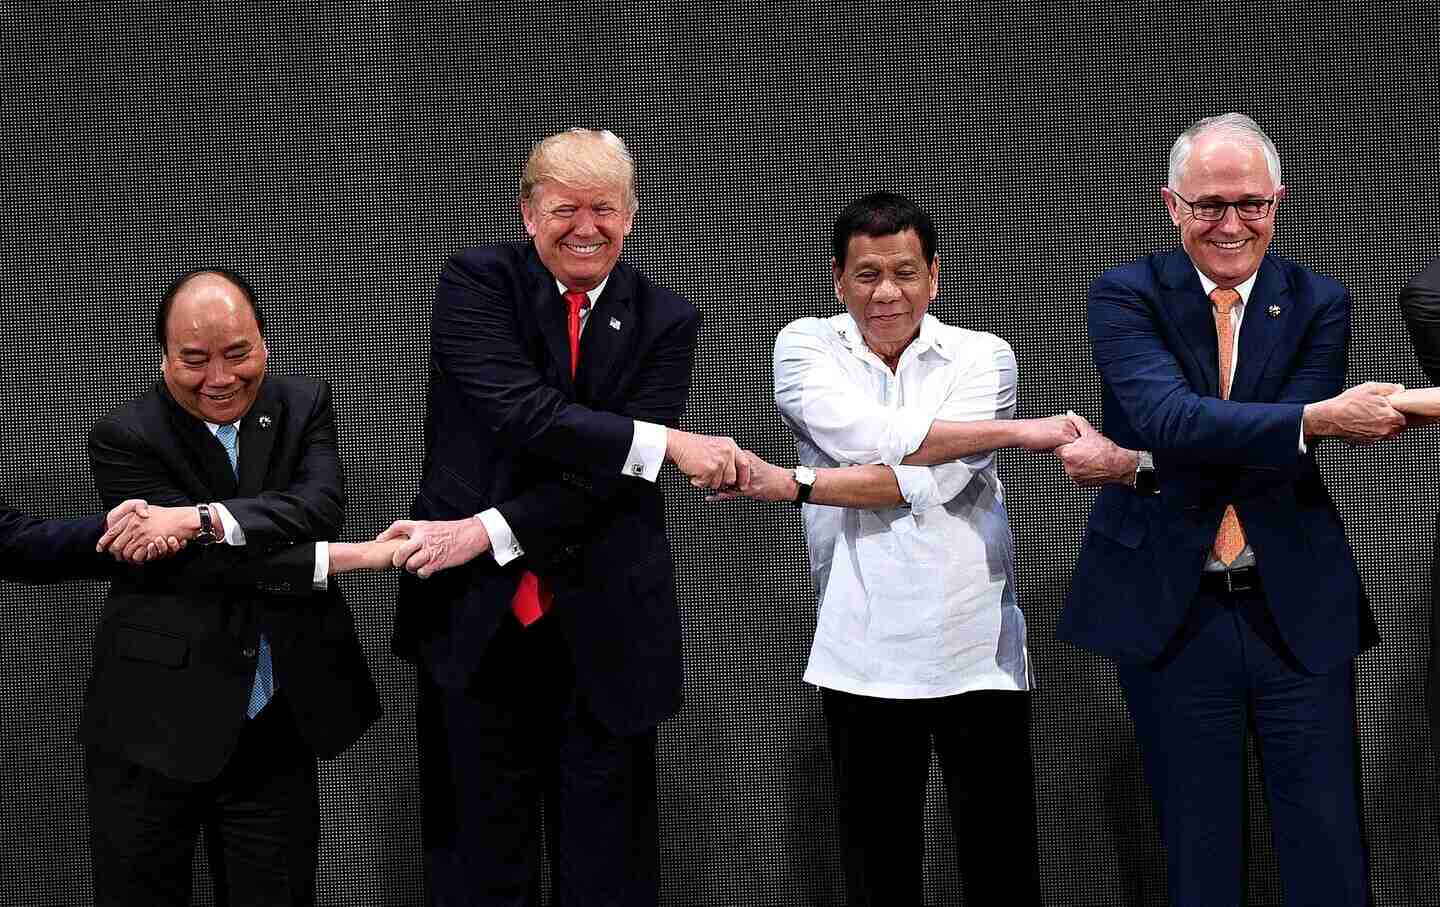 The Association of Southeast Asian Nations (ASEAN) members Vietnam's Prime Minister Nguyen Xuan Phuc, US President Donald Trump, Philippine President Rodrigo Duterte, Australia Prime Minister Malcolm Turnbull, link hands during the Opening ceremony of the 31st ASEAN Summit in Cultural Center of the Philippines in Manila on November 13, 2017.